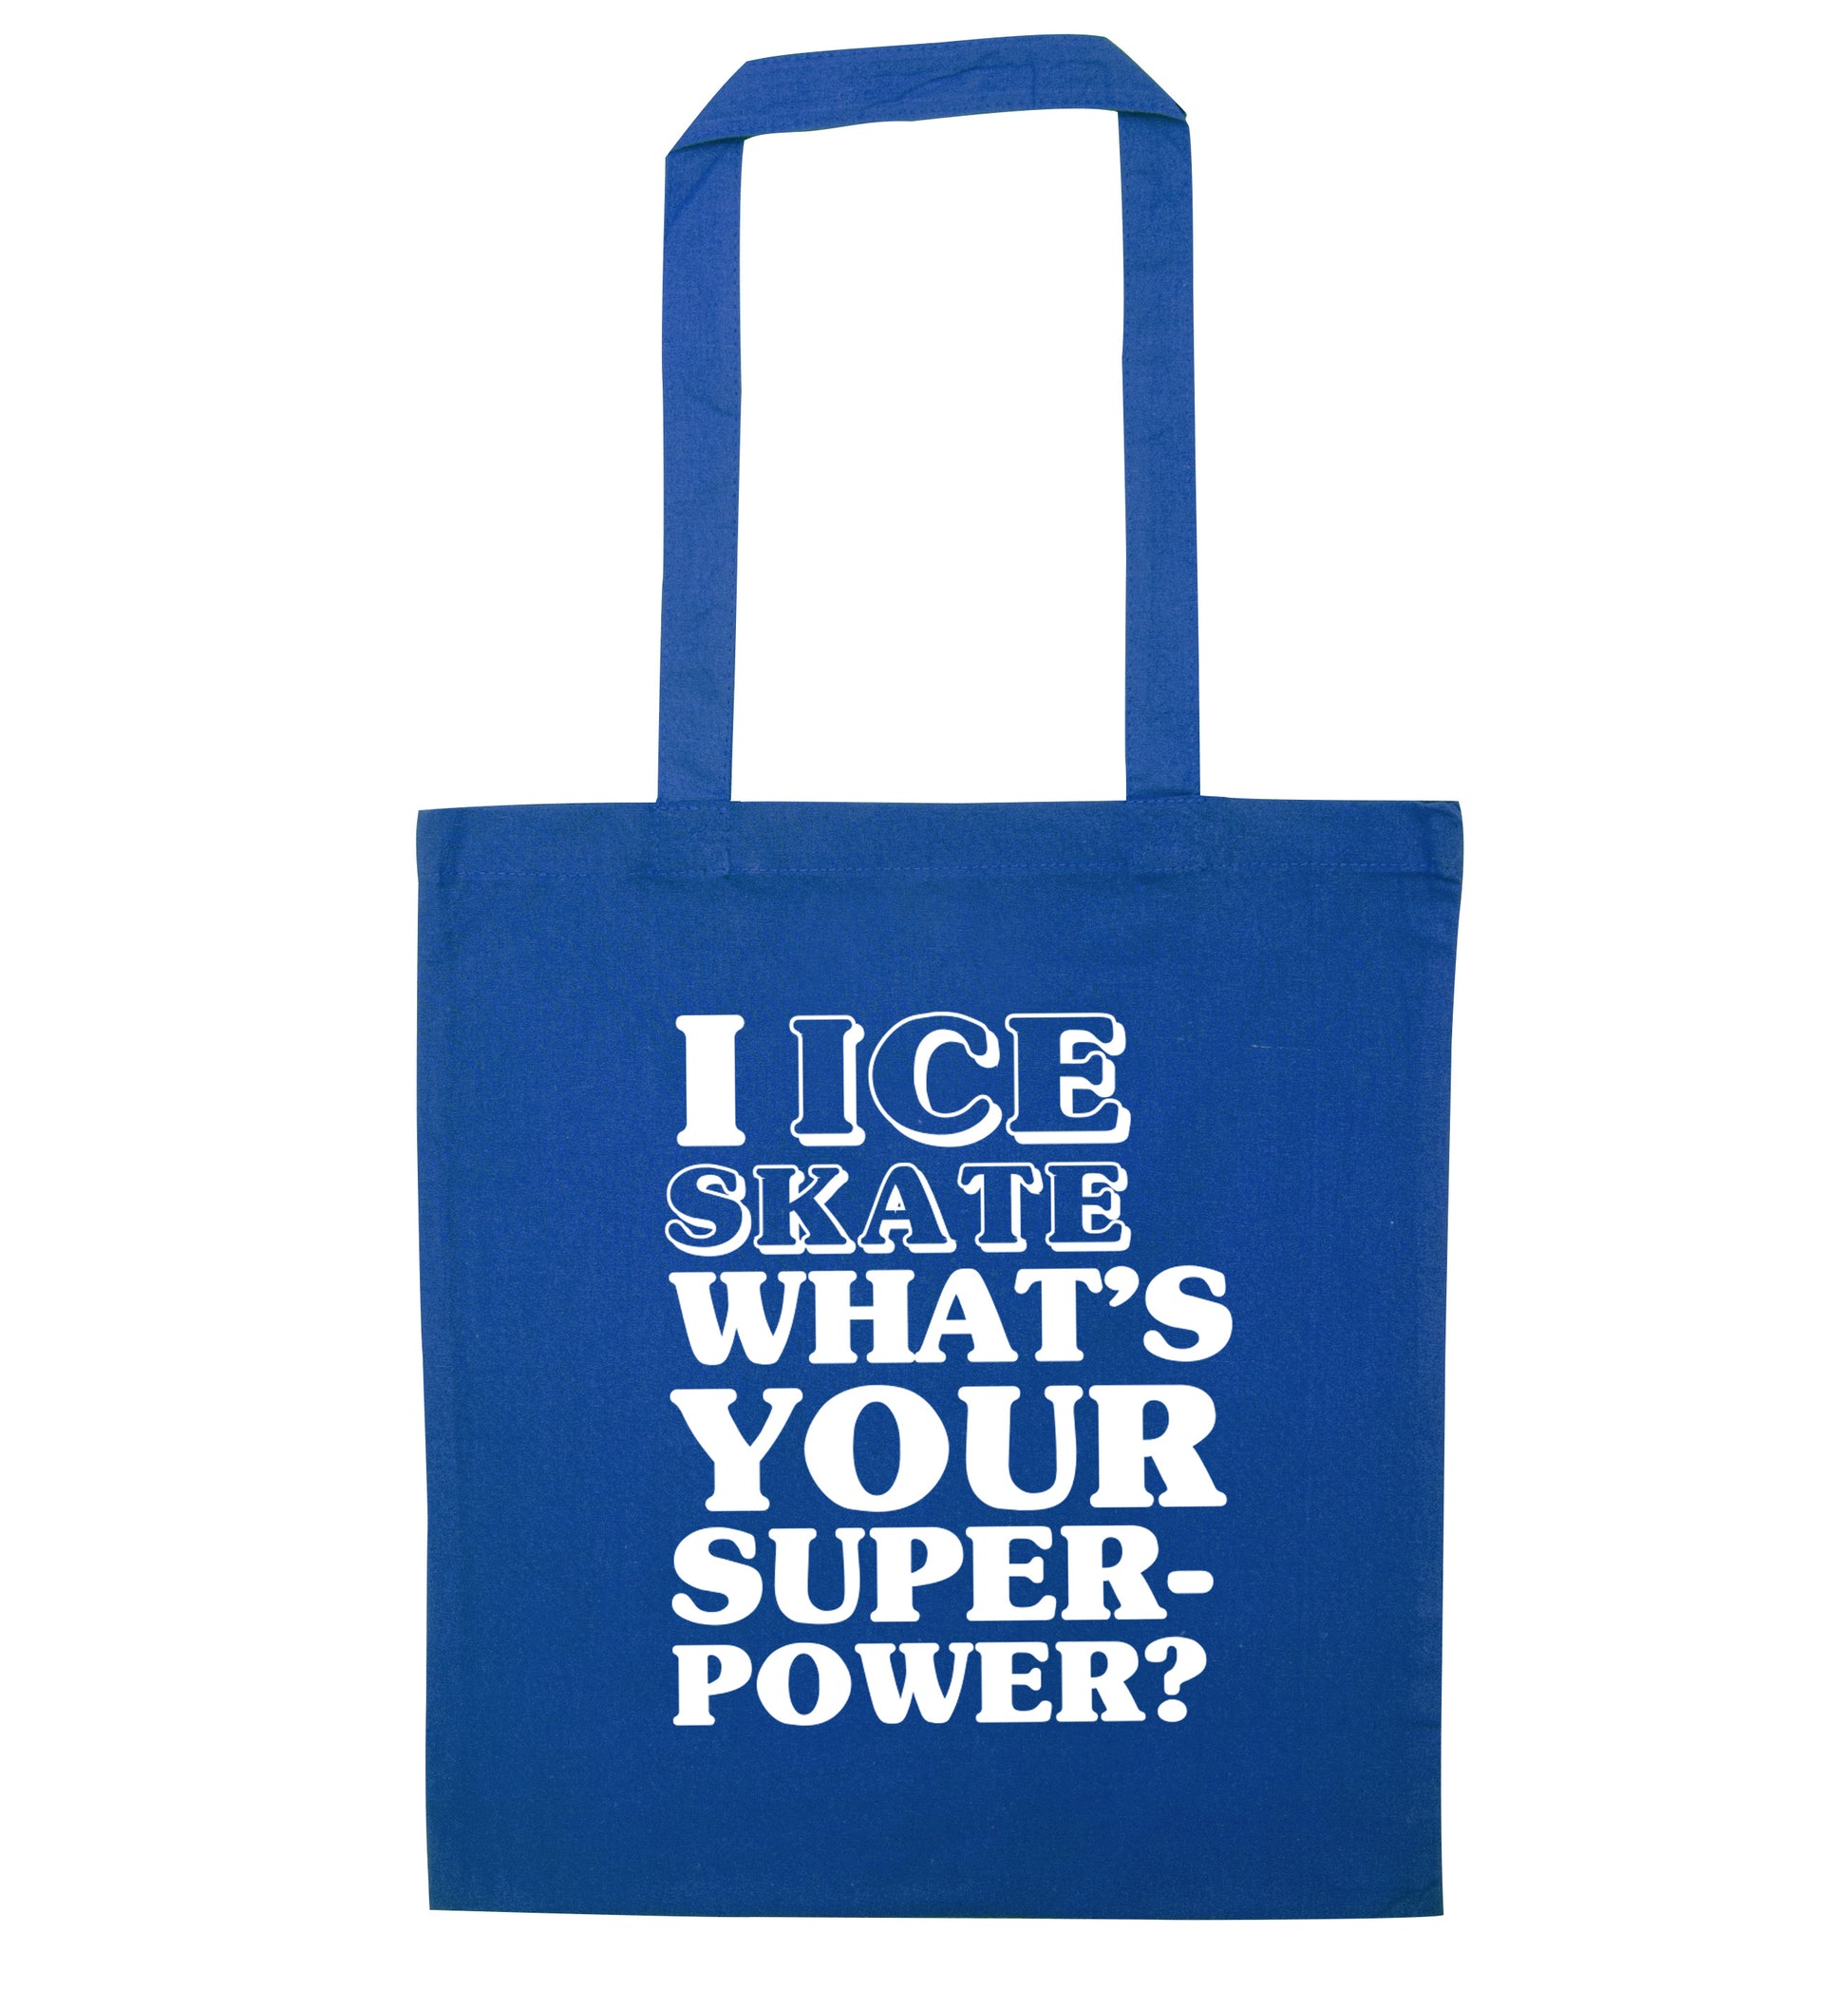 I ice skate what's your superpower? blue tote bag